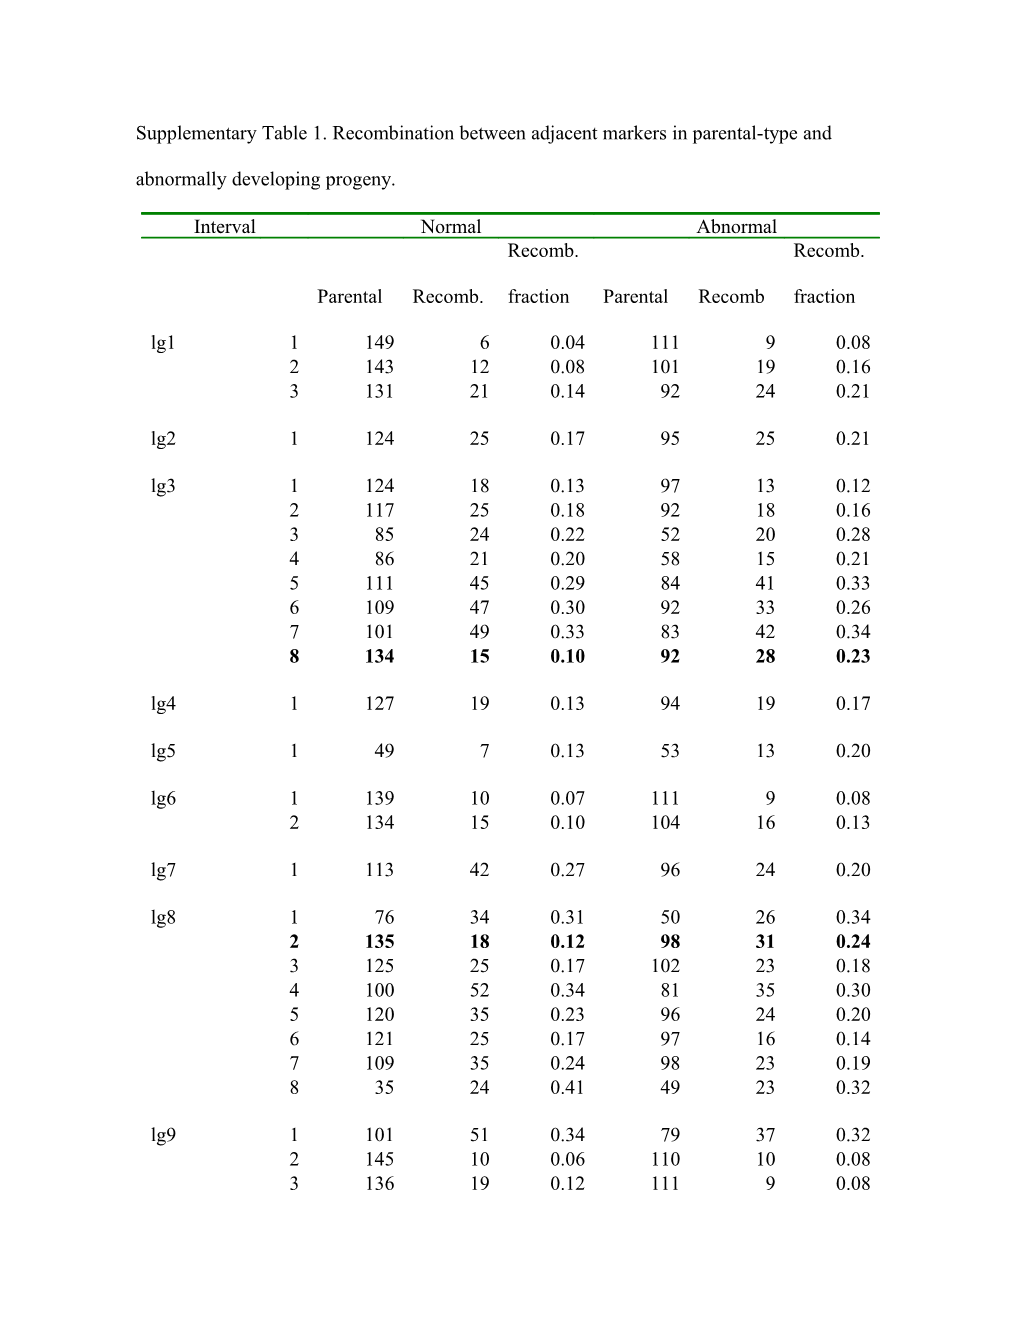 Supplementary Table 1. Recombination Between Adjacent Markers in Parental-Type and Abnormally